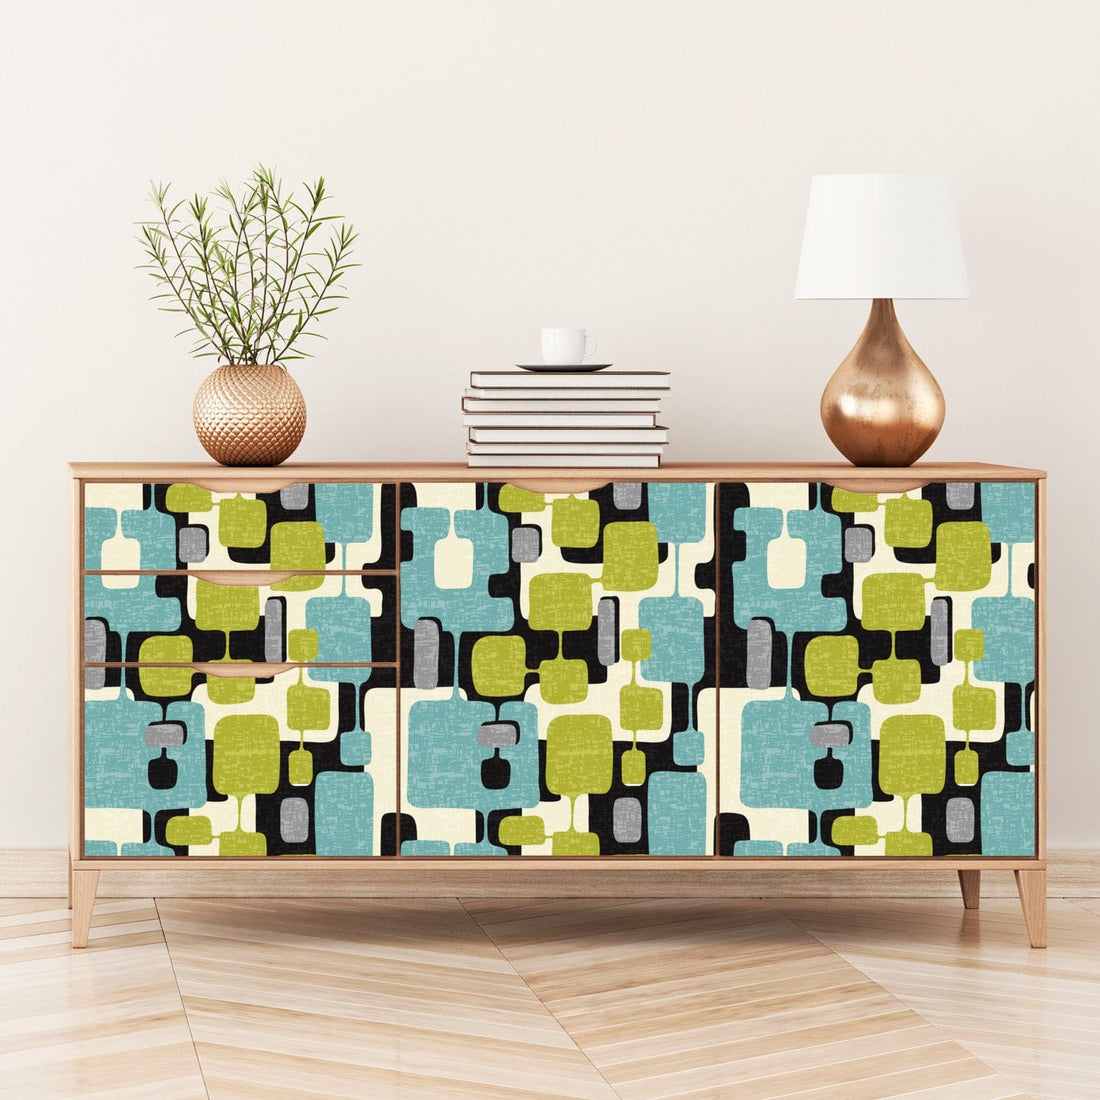 Kate McEnroe New York Mid Century Modern Abstract Peel and Stick Wallpaper Panels in Retro Teal, Lime Green, Gray, and Cream HuesWallpaper75643